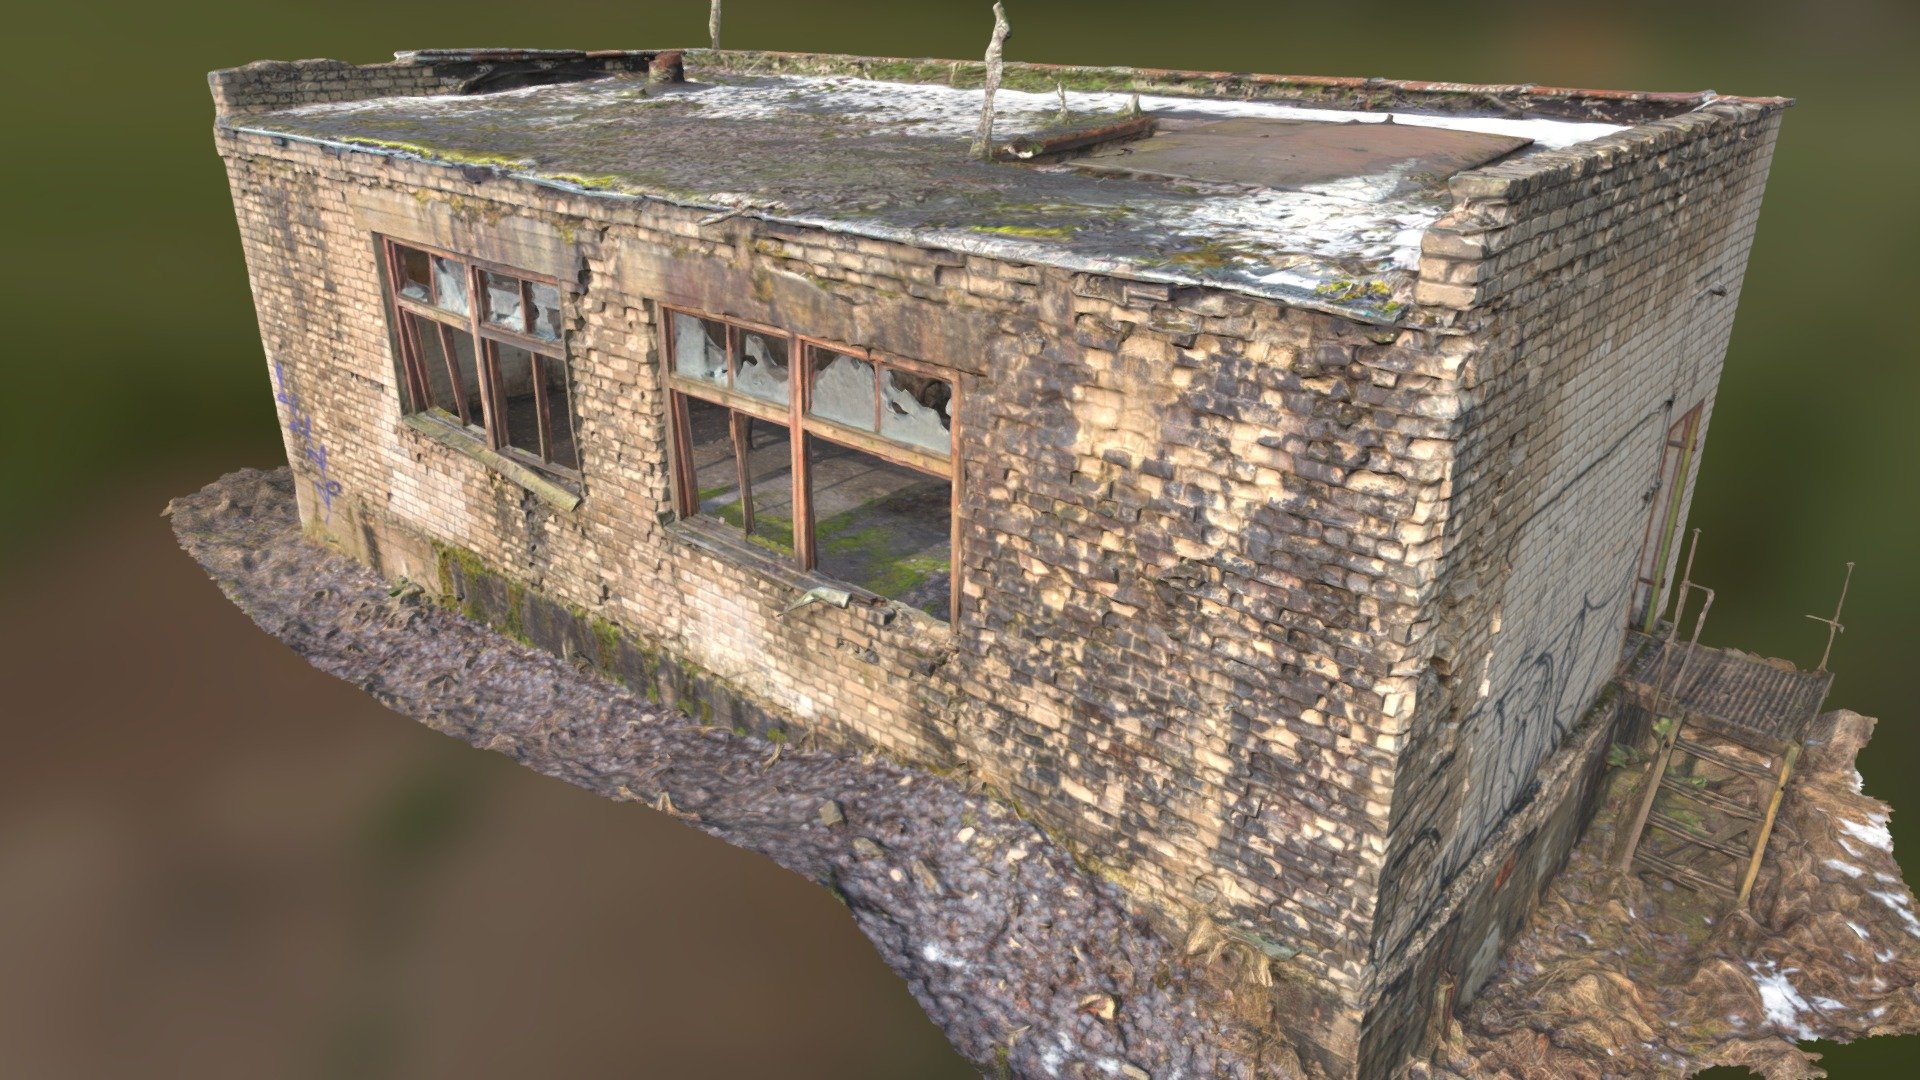 3D scan of an old, mossy soviet building with interior.
Old, abandoned pumps and pipes inside. 
With normal map 3d model